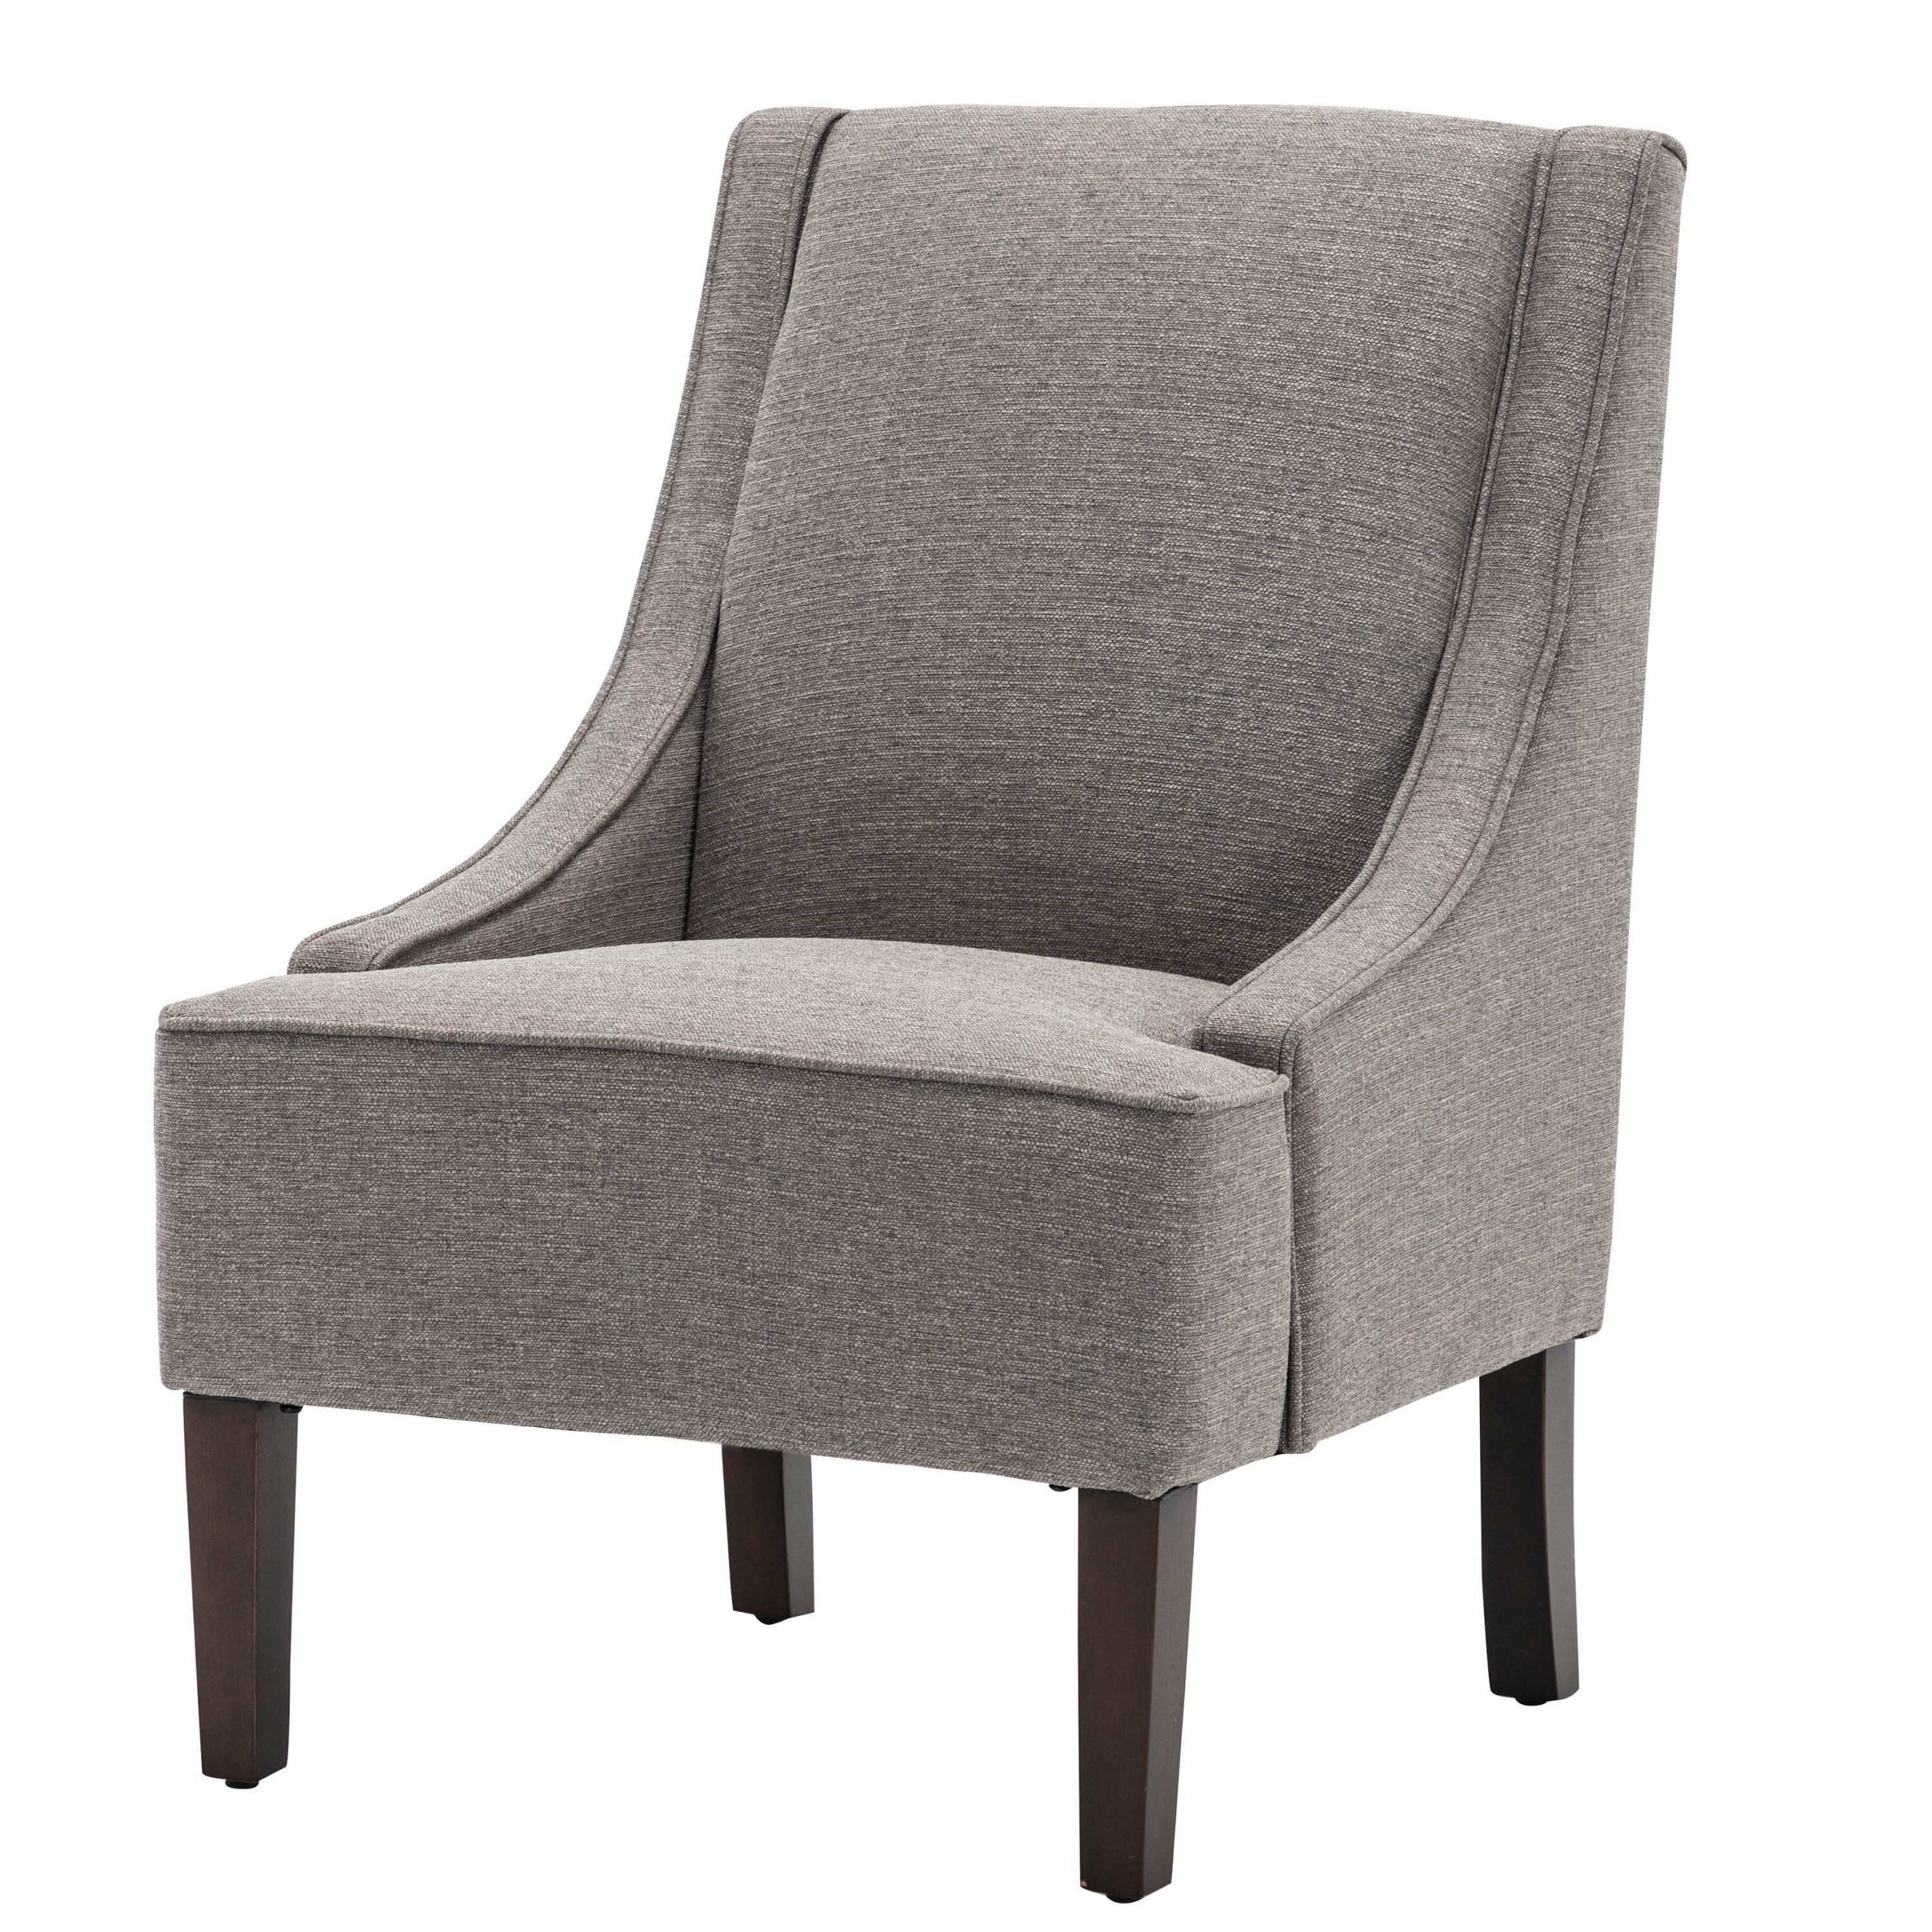 Altamahaw 25.2" Swoop Side Chair Intended For Altamahaw Swoop Side Chairs (Photo 5 of 15)